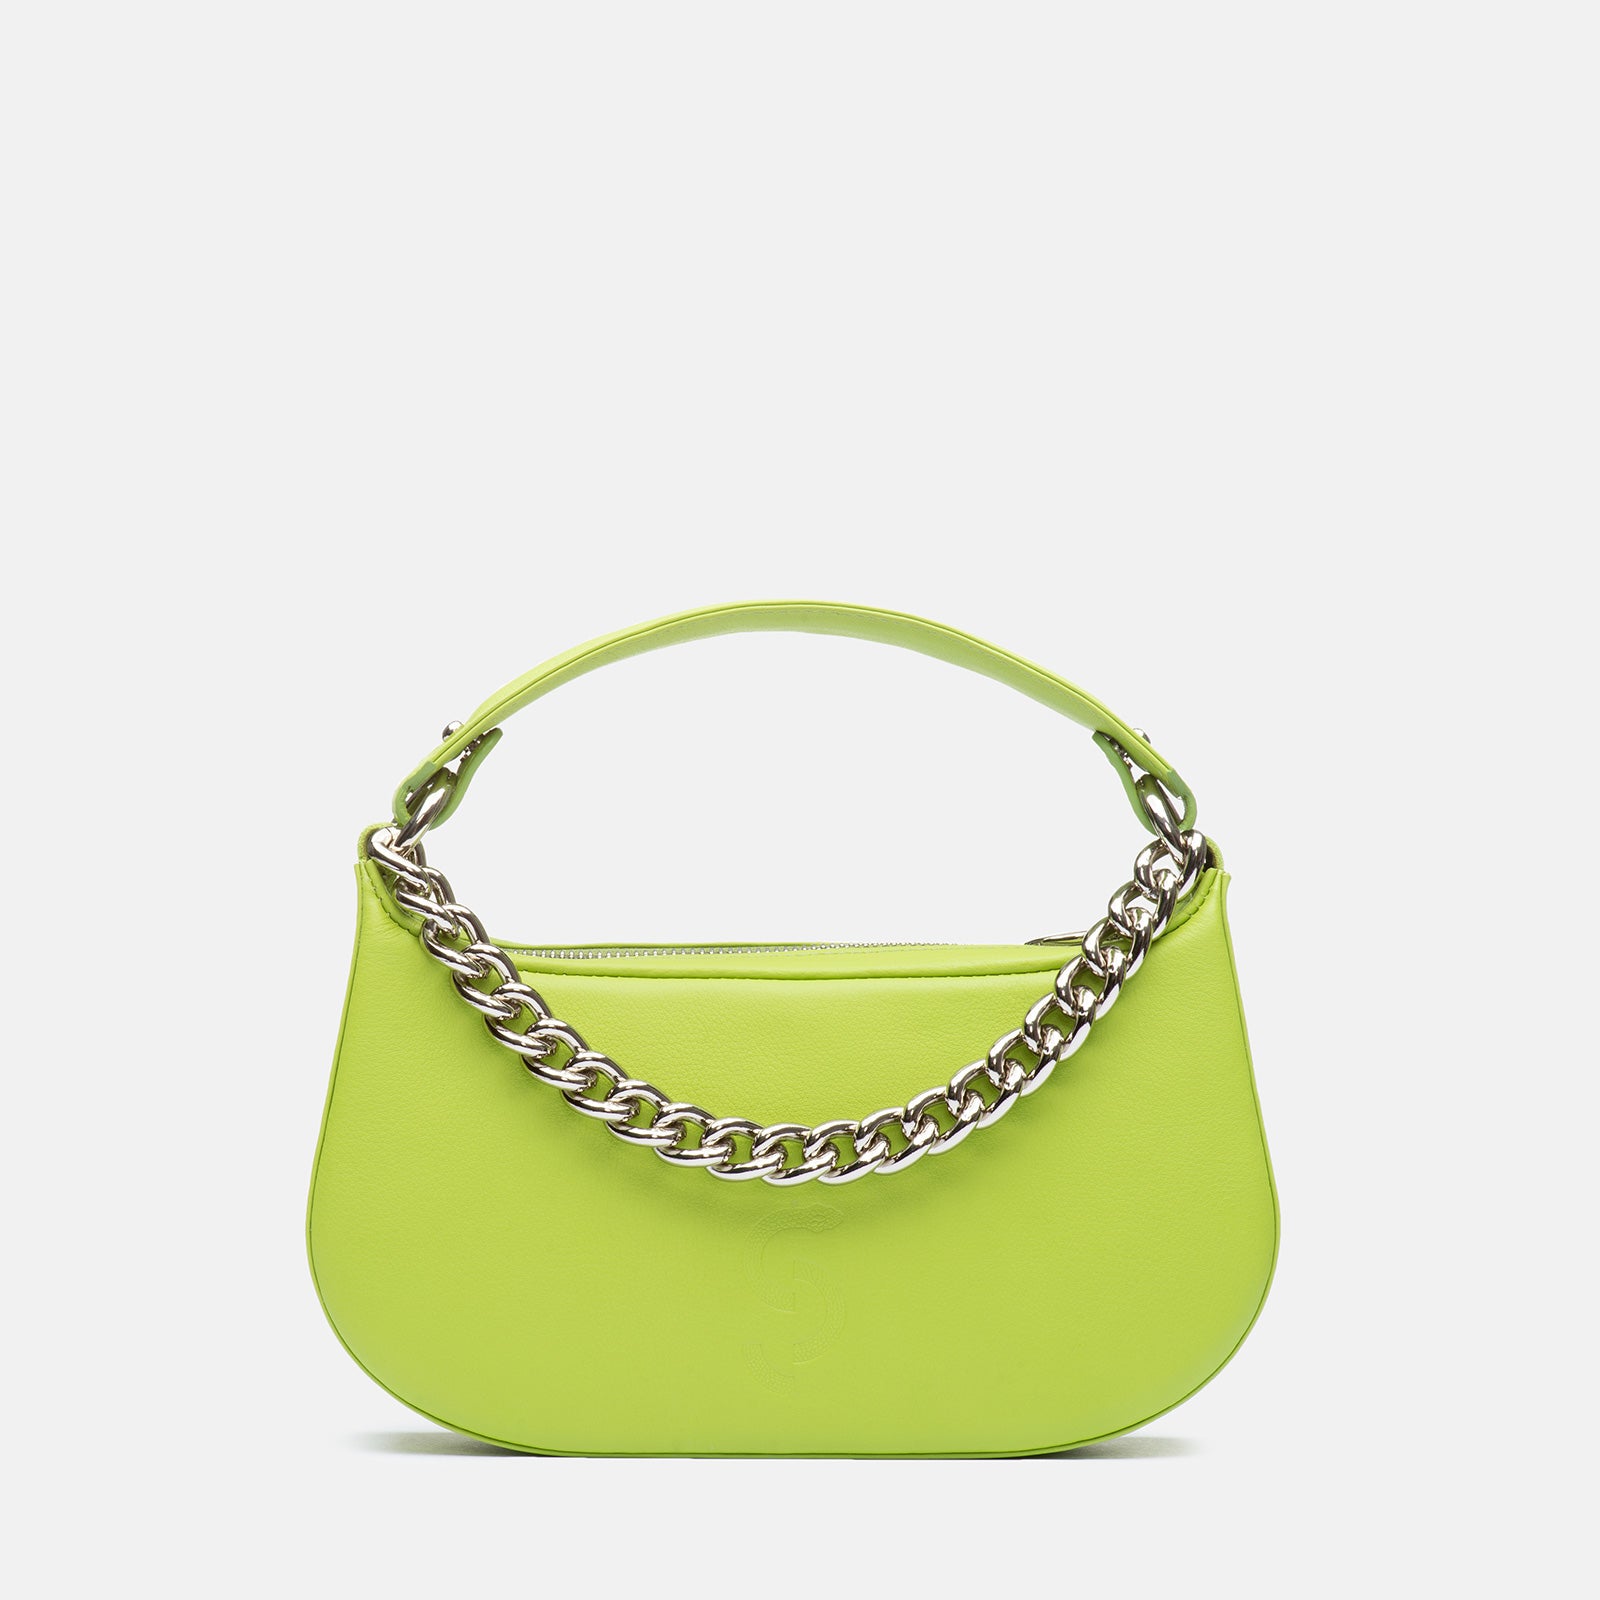 Chumbak Neon Floral WomenS Handbag  Neon Green Buy Chumbak Neon Floral  WomenS Handbag  Neon Green Online at Best Price in India  Nykaa